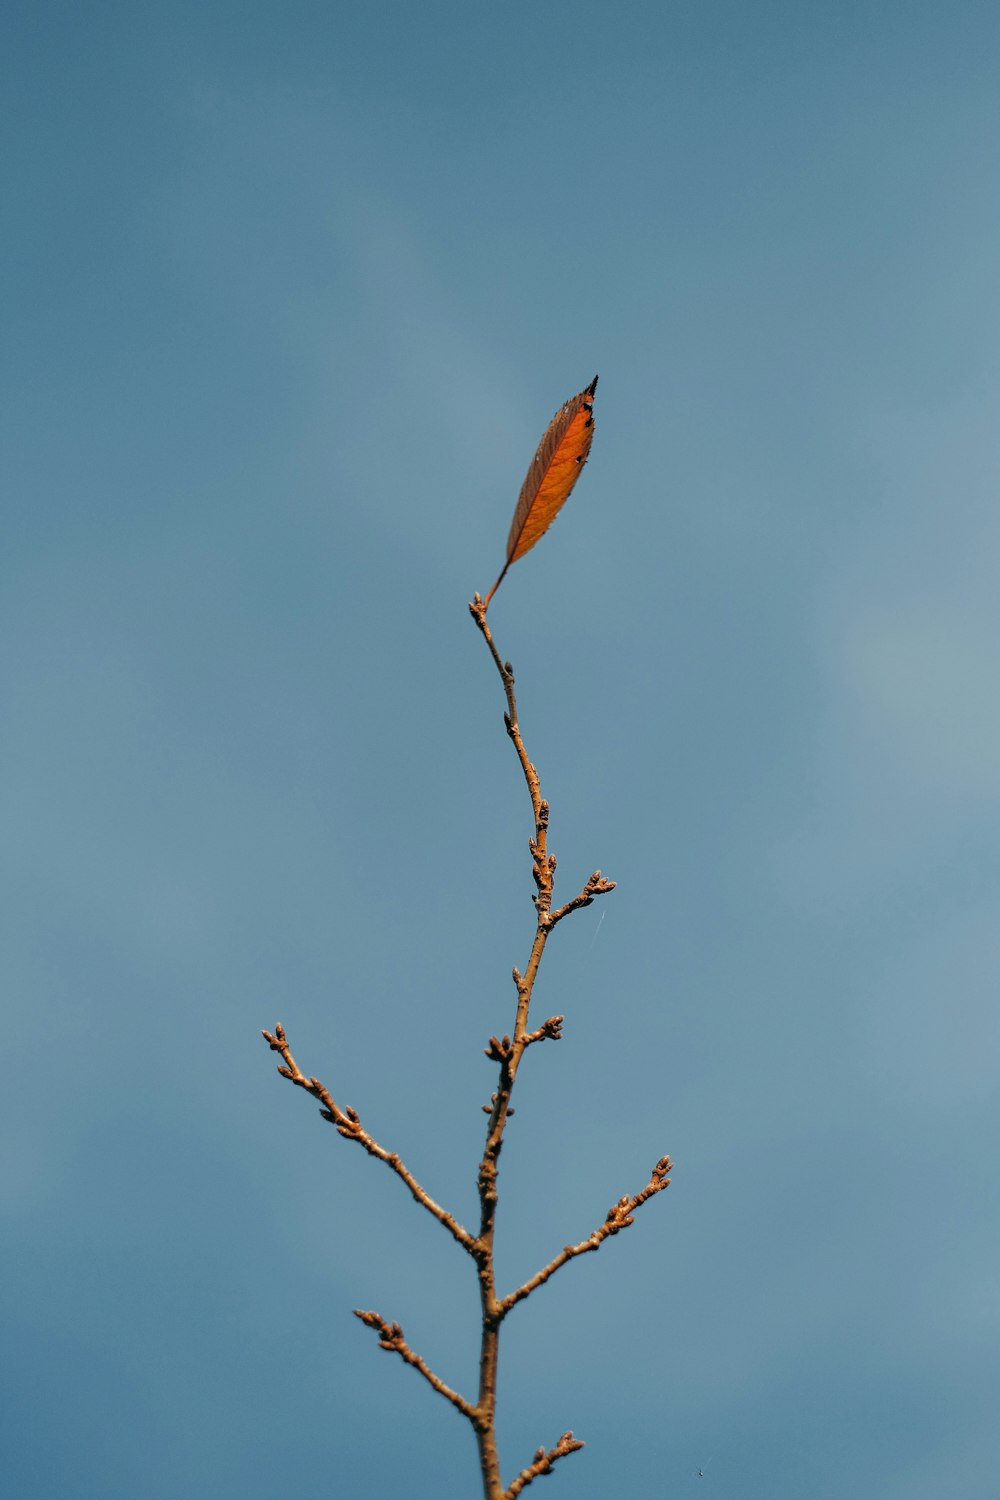 a leaf on a tree branch against a blue sky